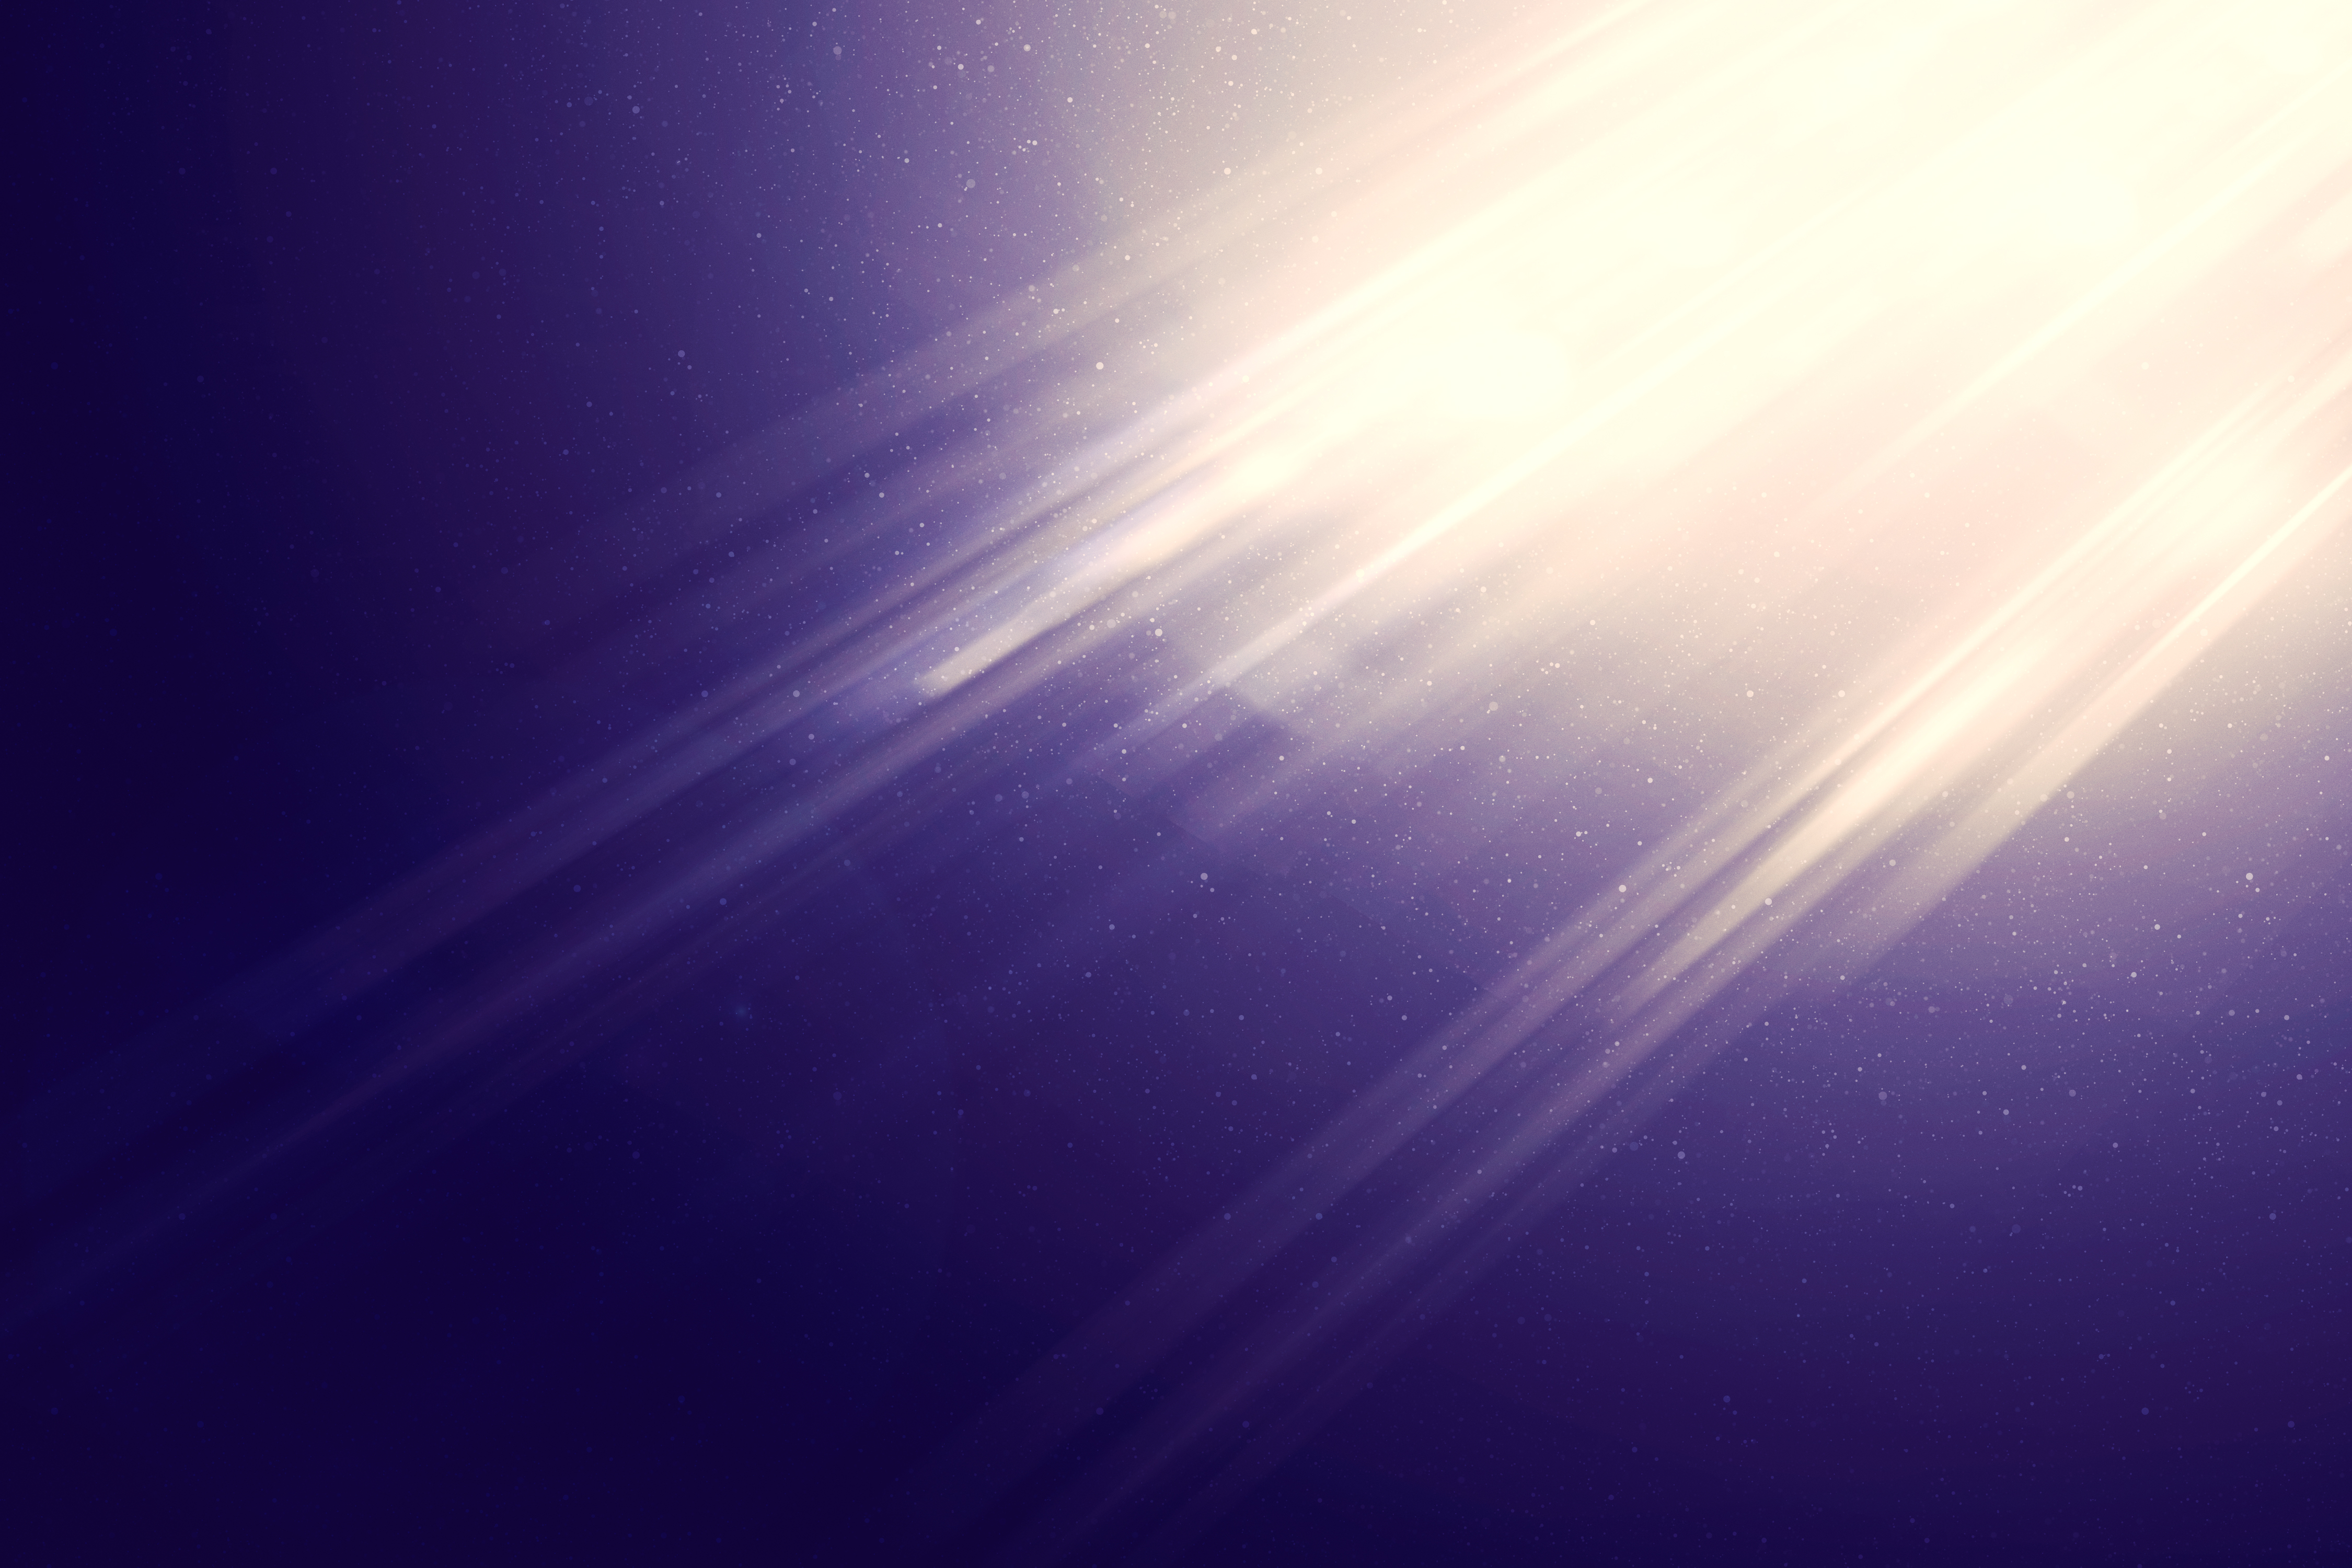 Free download wallpaper Abstract, Purple on your PC desktop